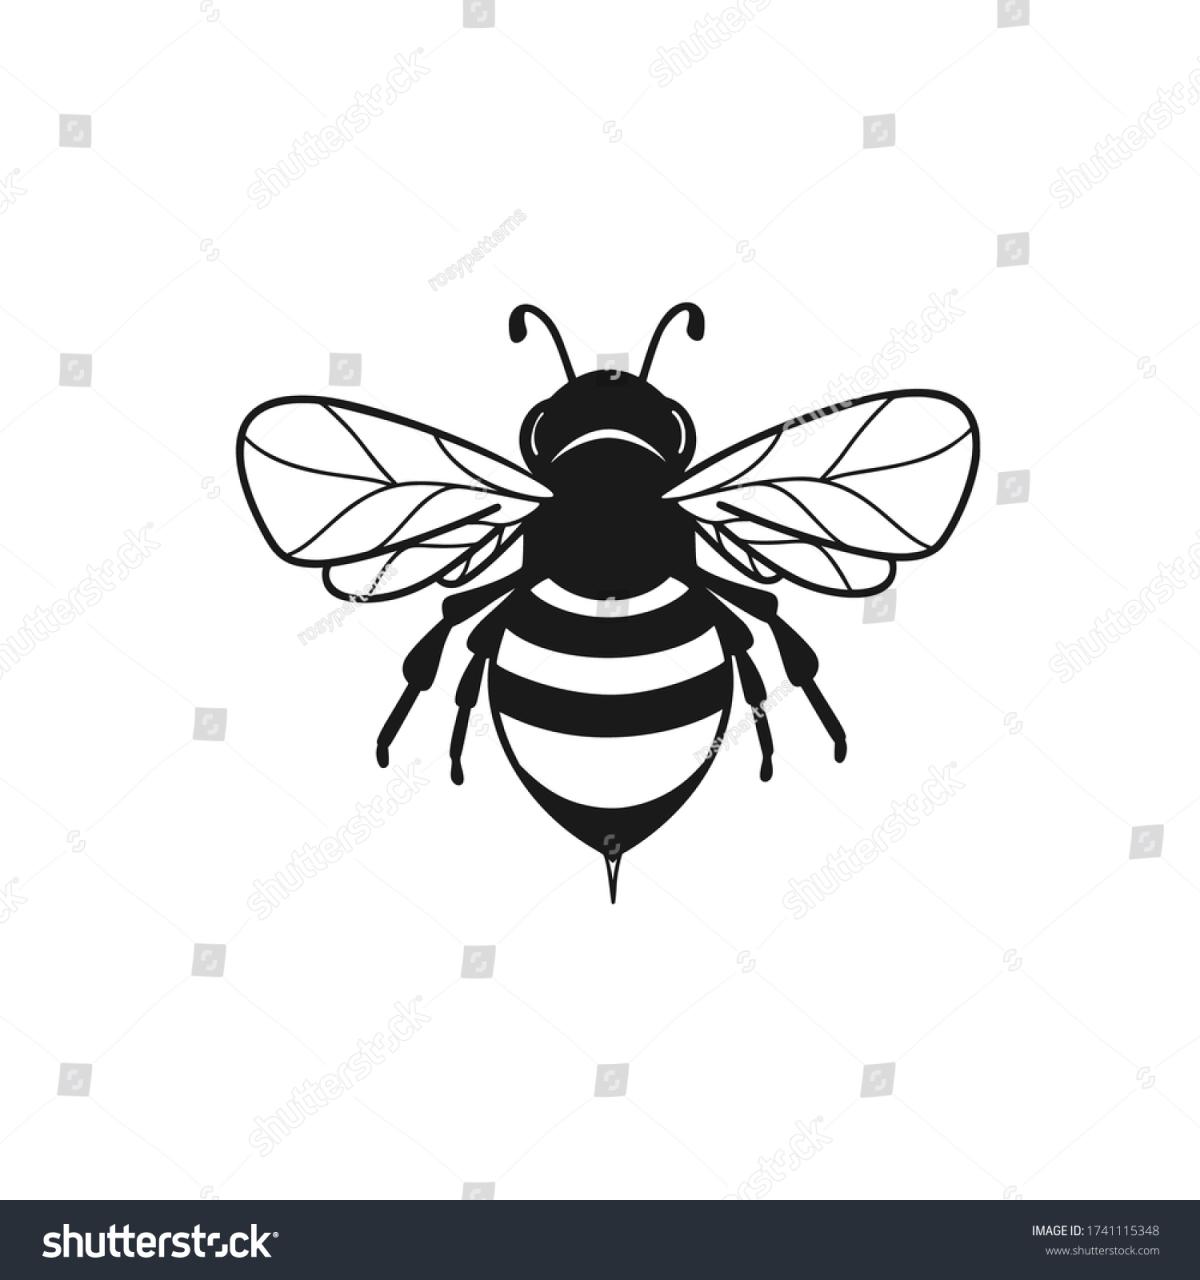 1,972 Black White Bee Clipart Images, Stock Photos & Vectors | Shutterstock